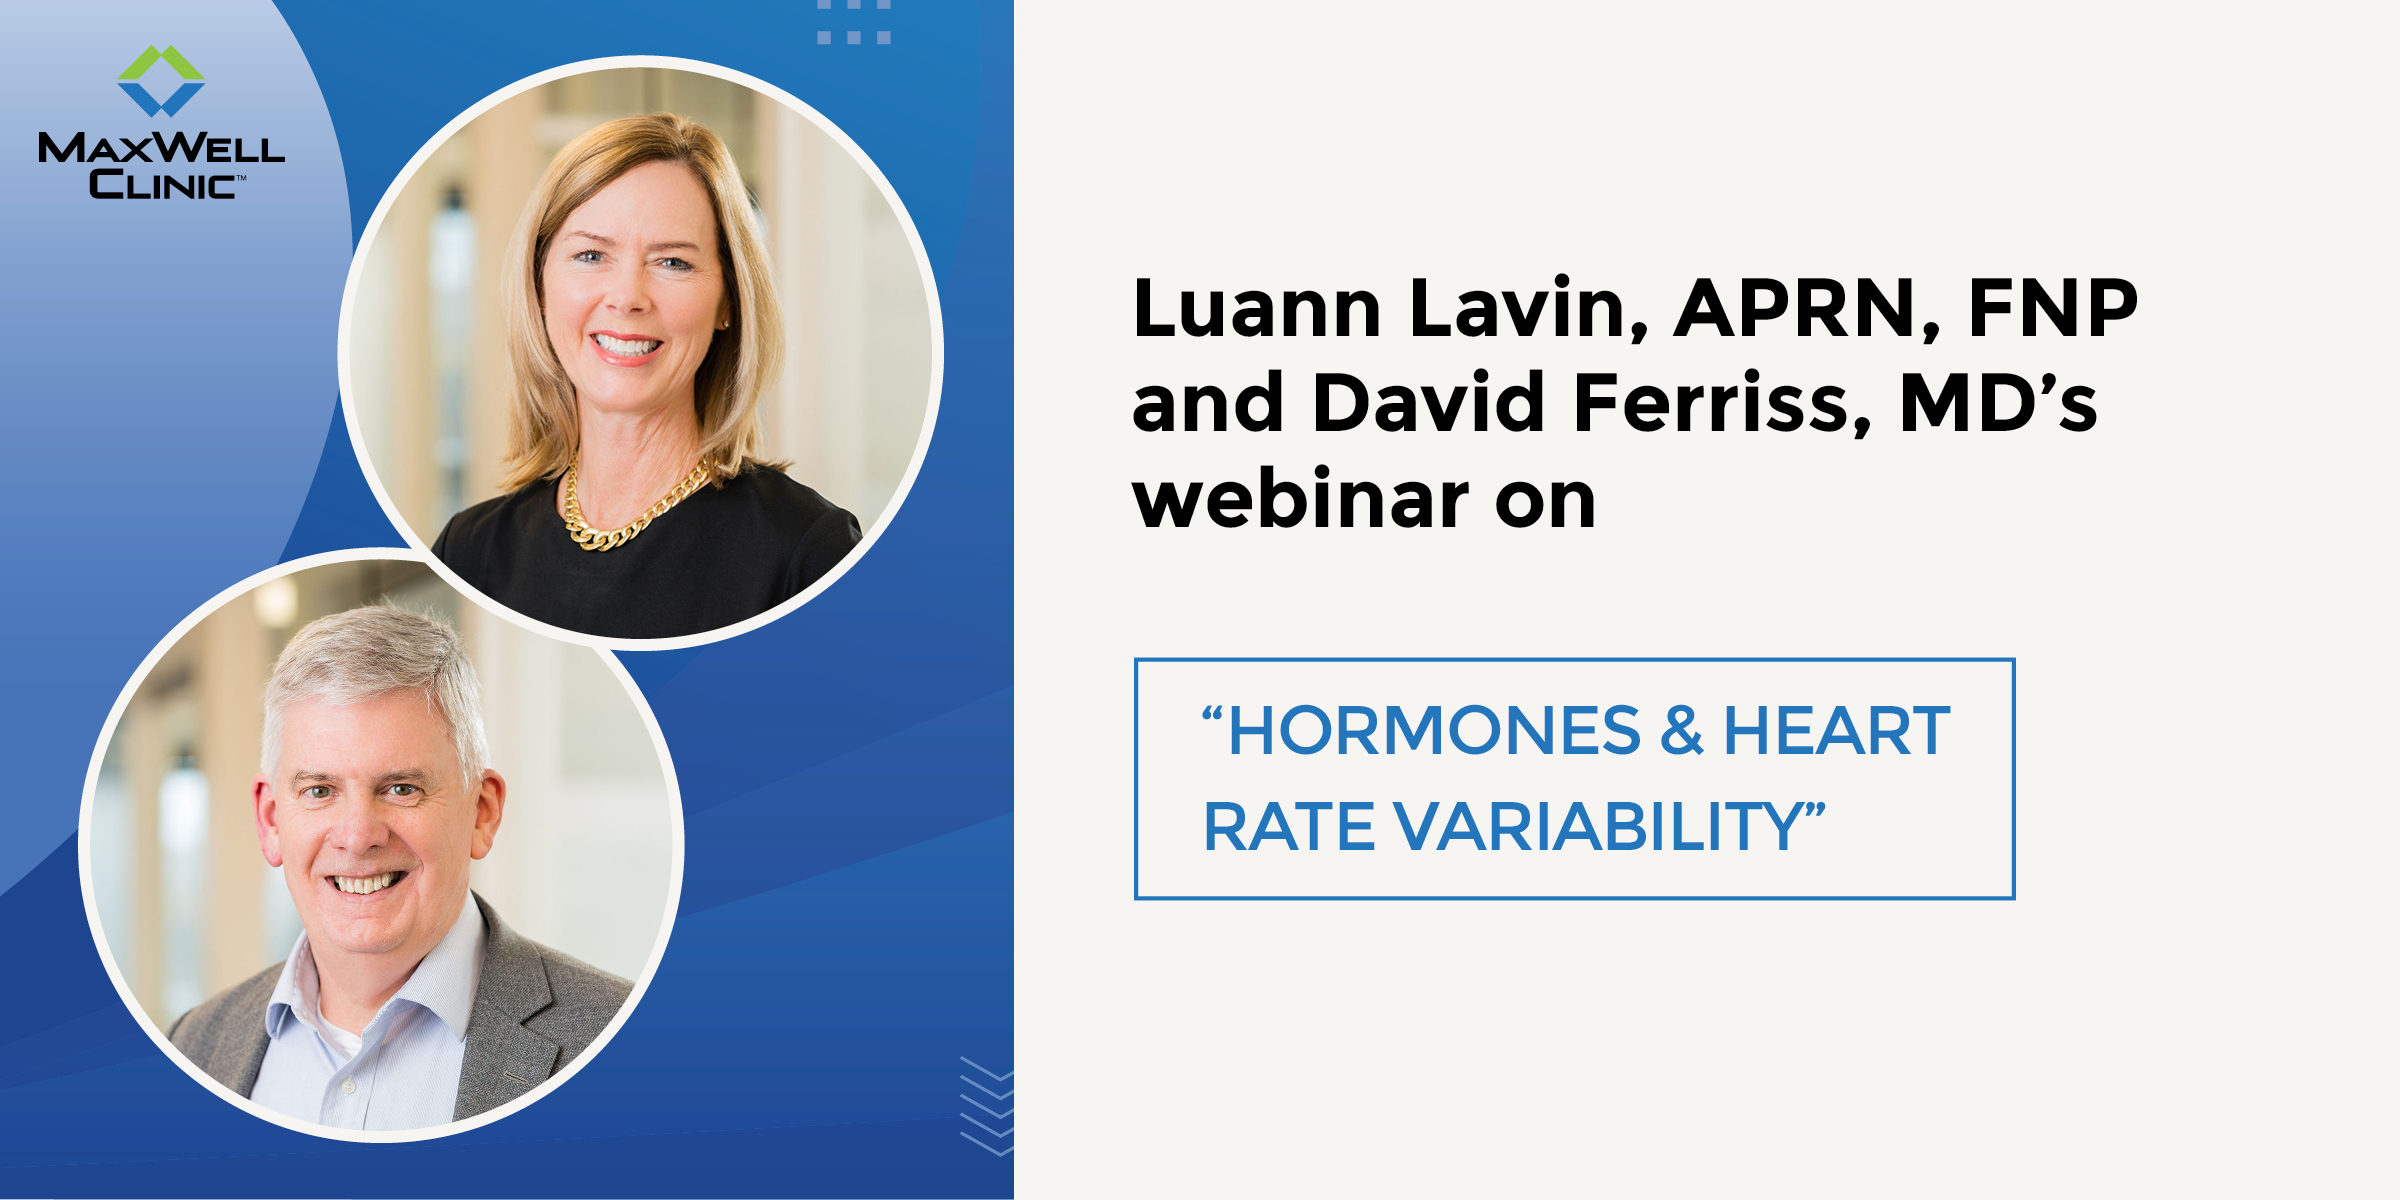 Hormones & Heart Rate Variability: Keep The Heart Growing Fonder with Luann Lavin & David Ferriss